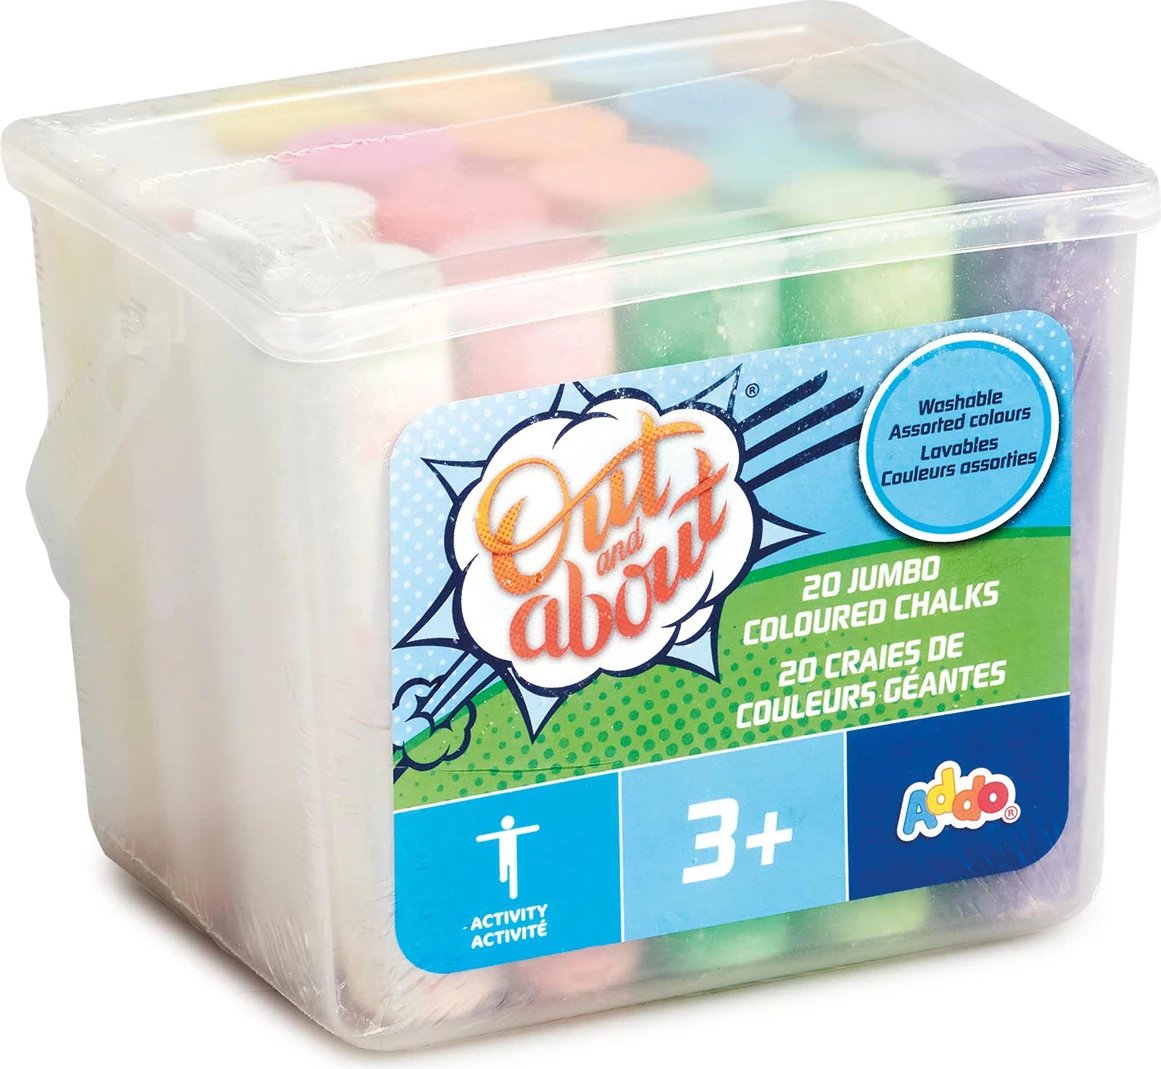 Out and About 20 Jumbo Coloured Chalks